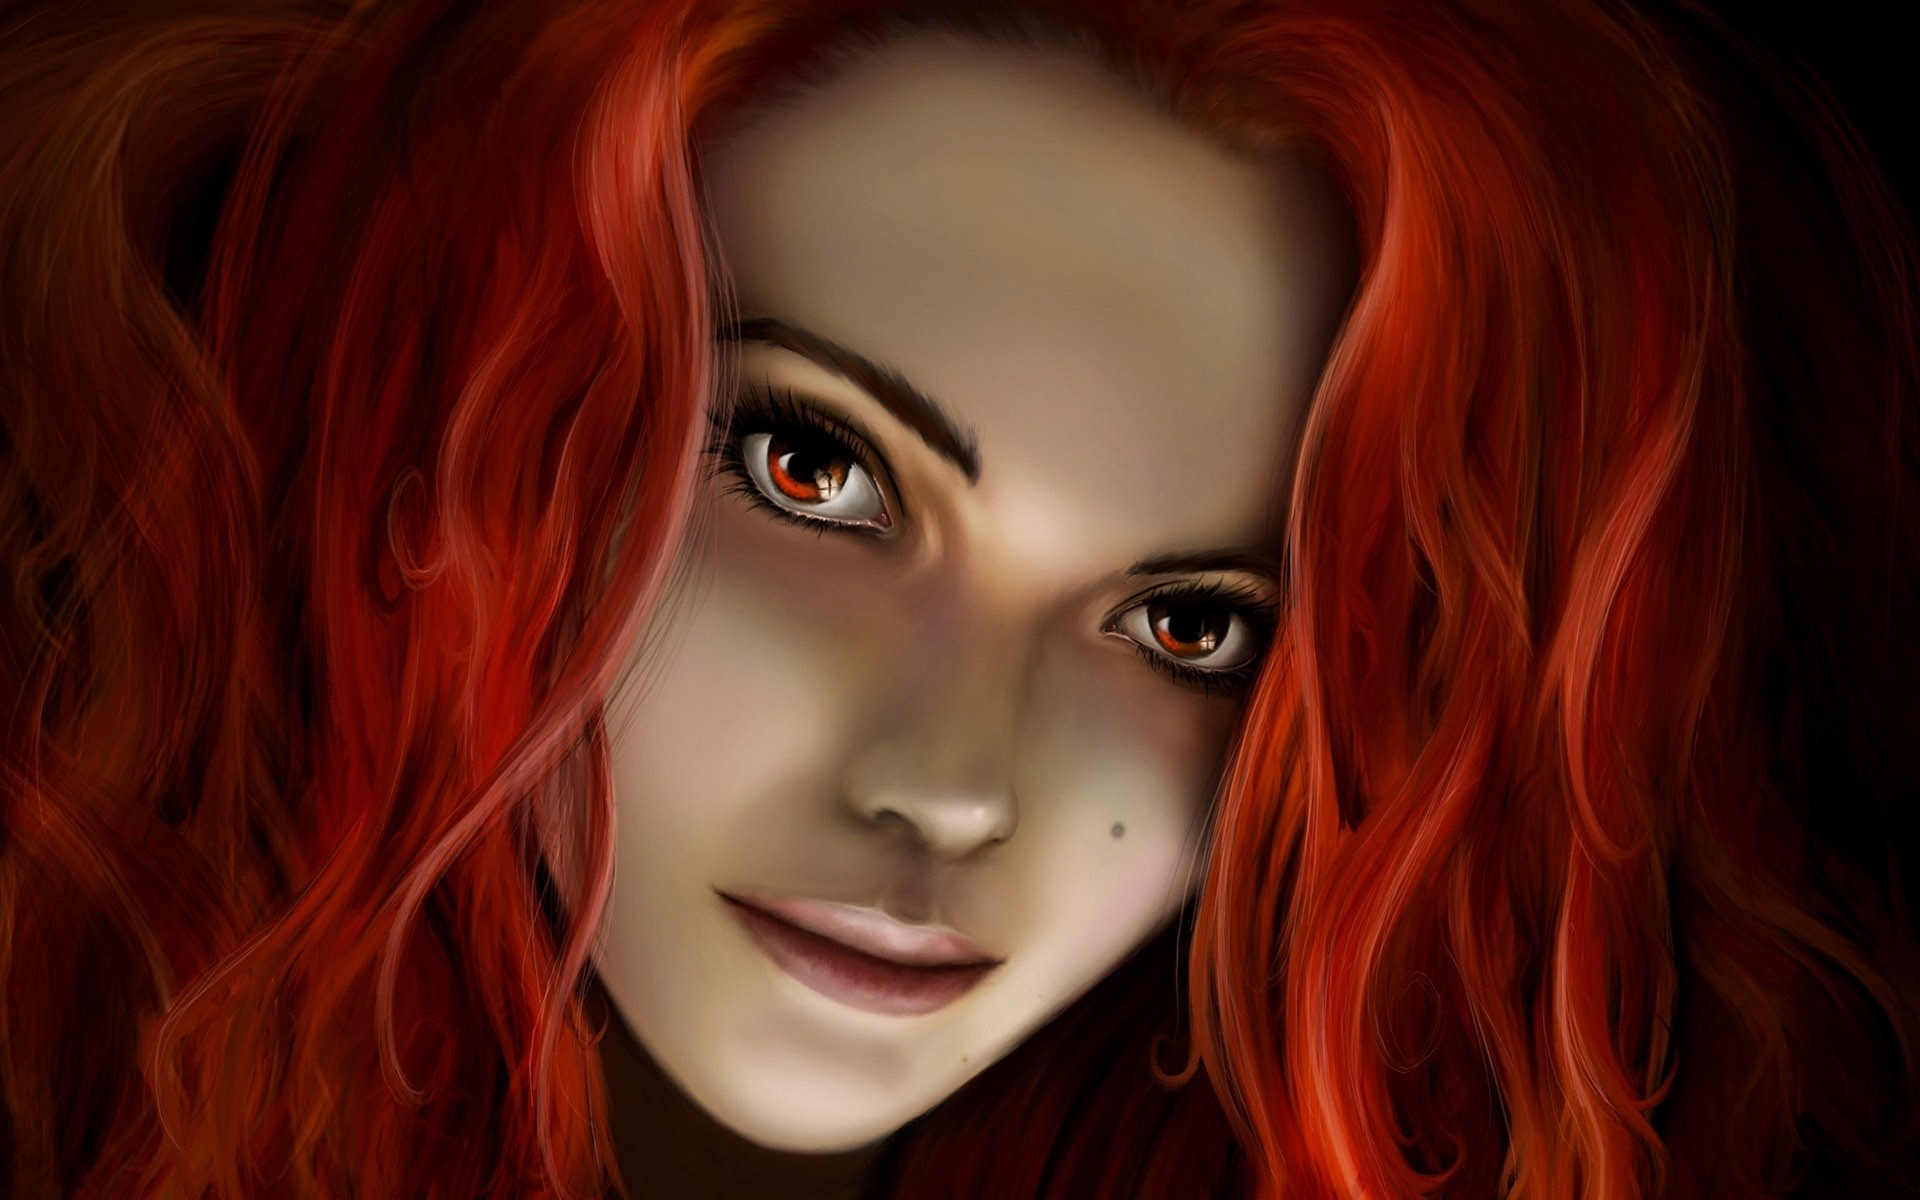 1920x1200 Fantasy girl - Redhead wallpapers and stock photos